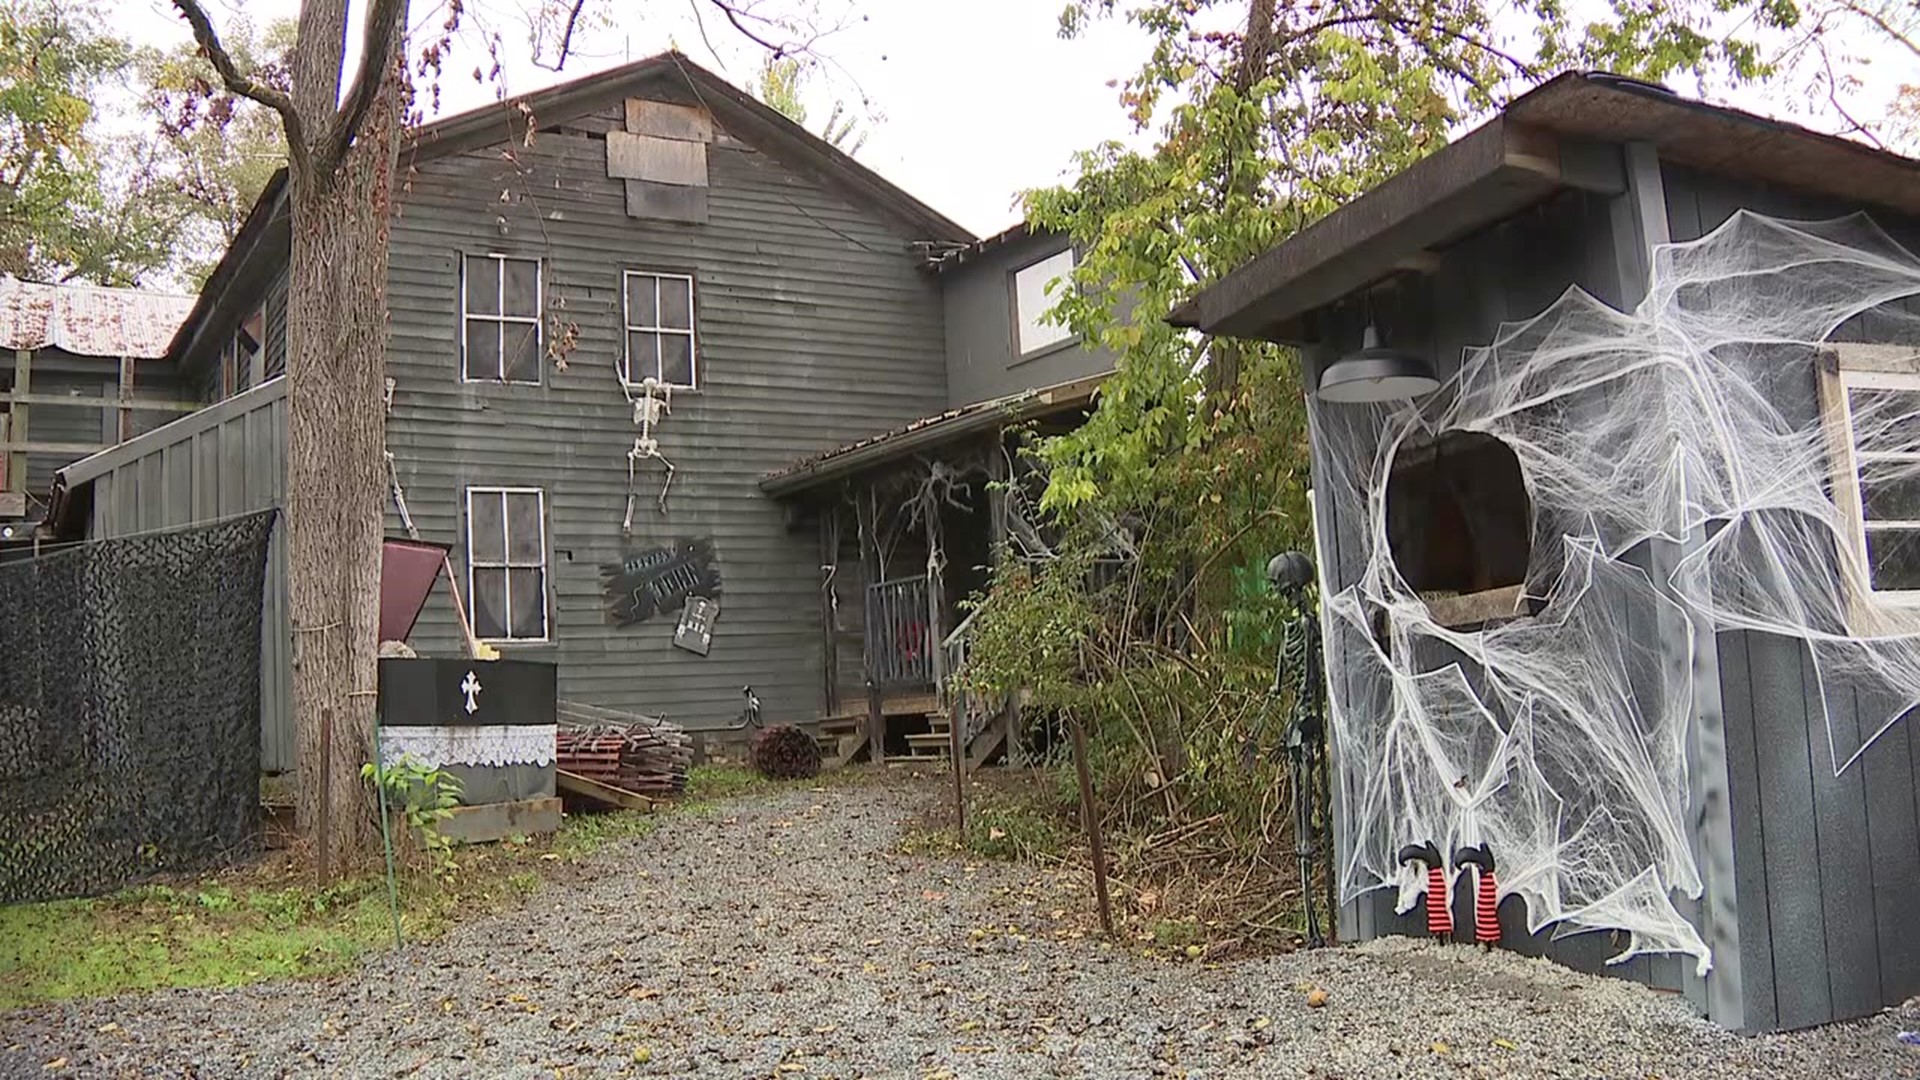 Haunted houses will soon be popping up all over, including a longtime tradition in Northumberland County.